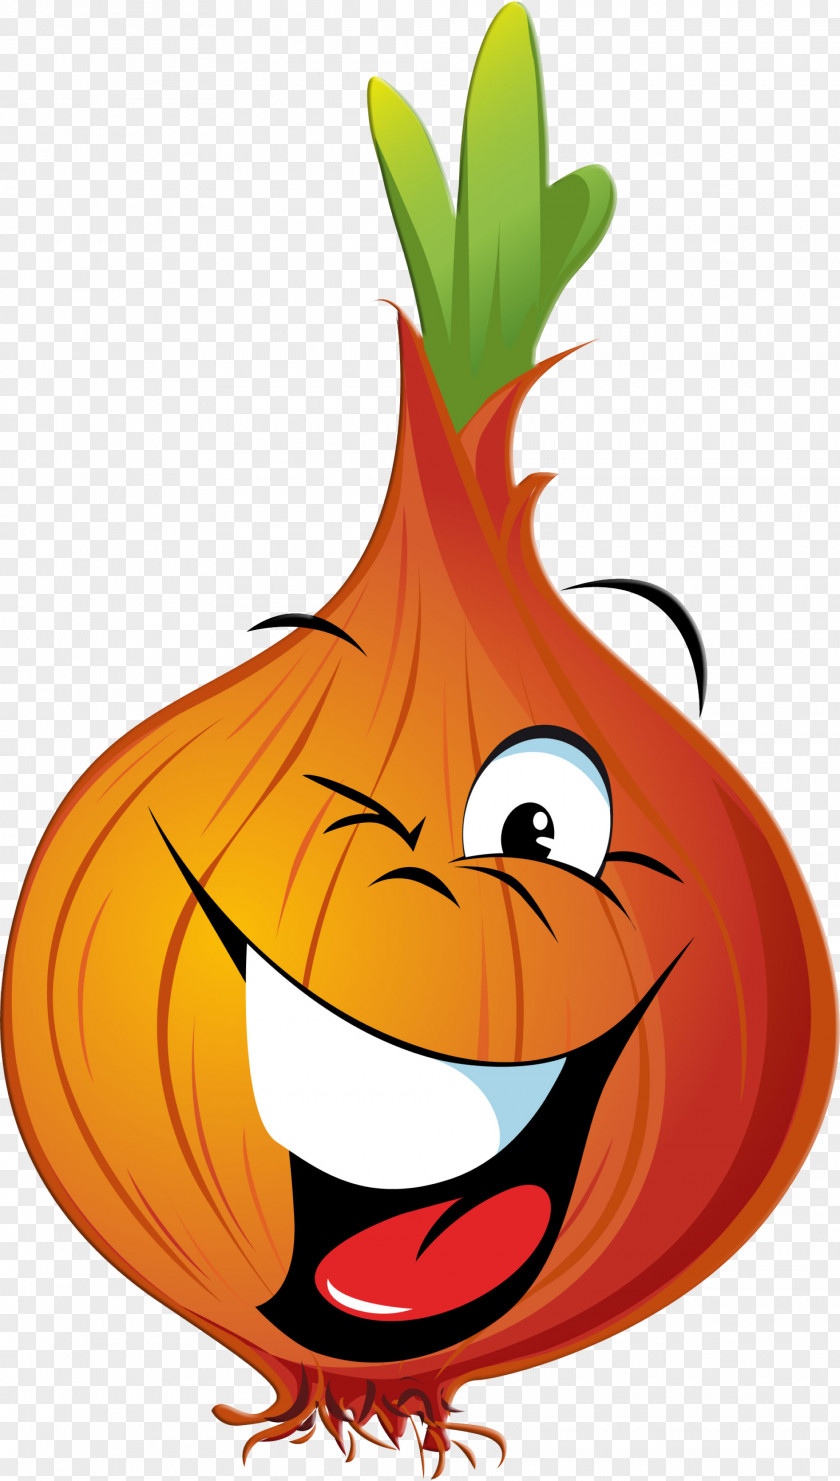 Onion Vector Red Vegetable Clip Art PNG